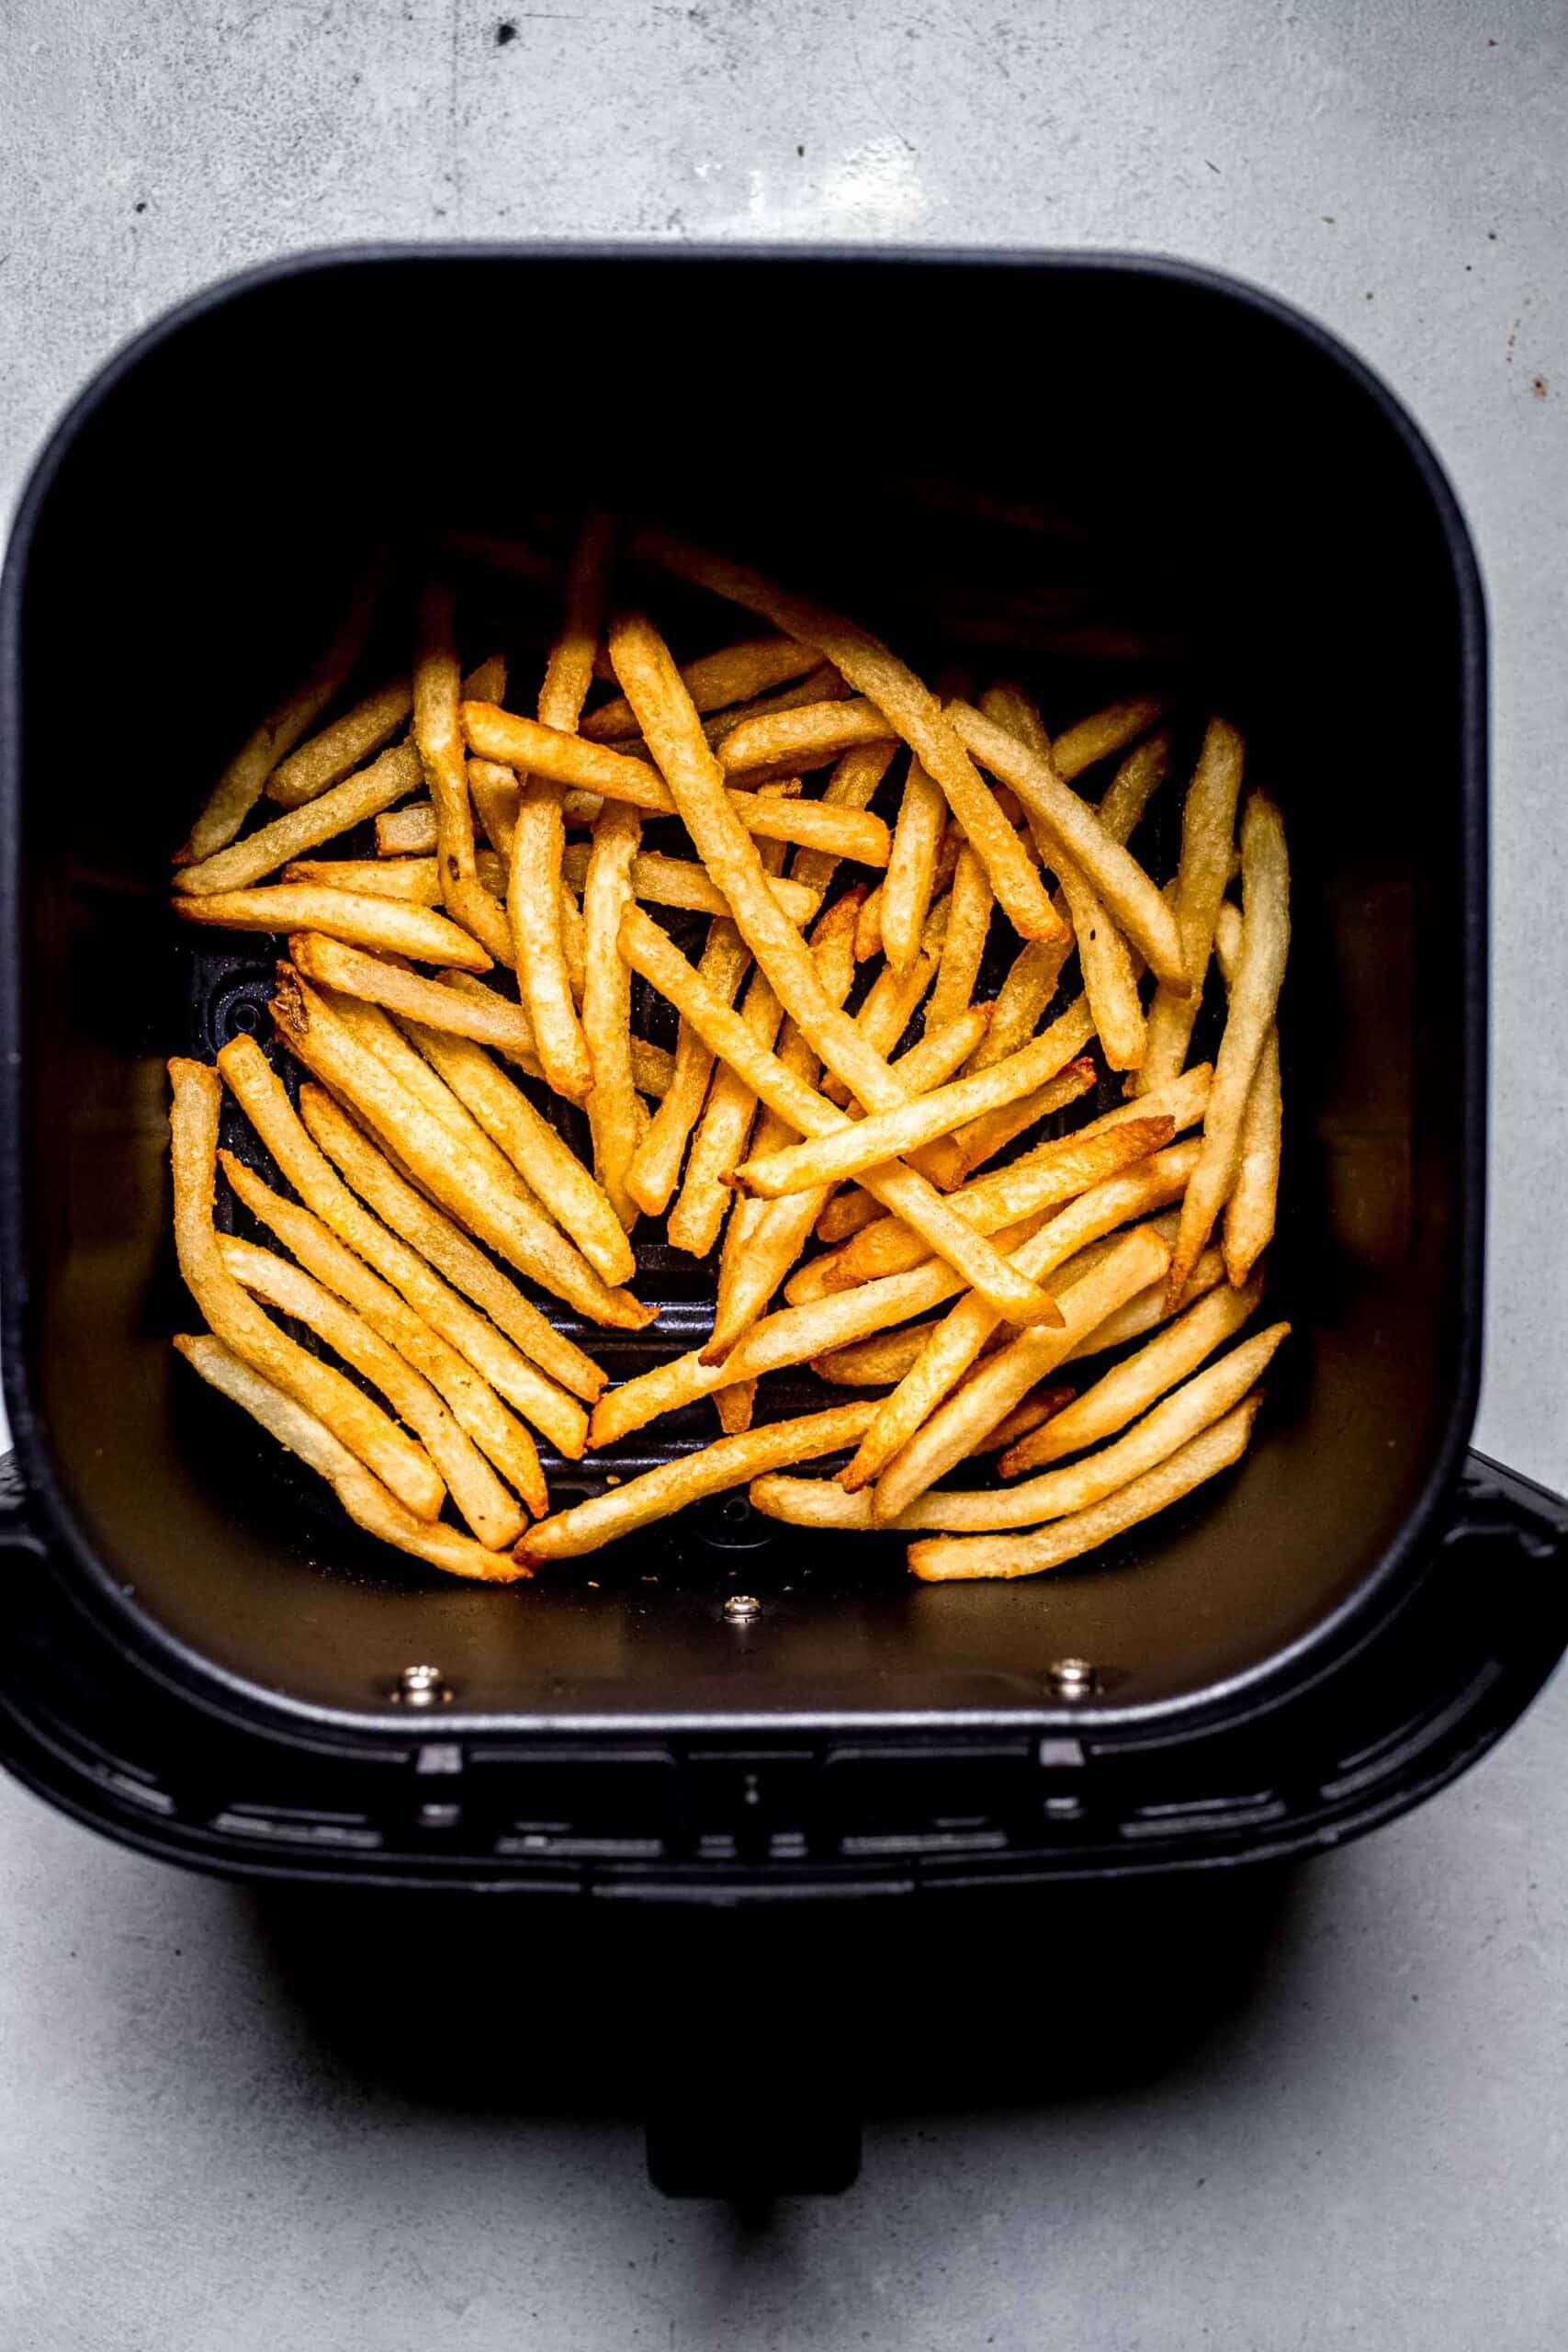 Cooked french fries in air fryer. 